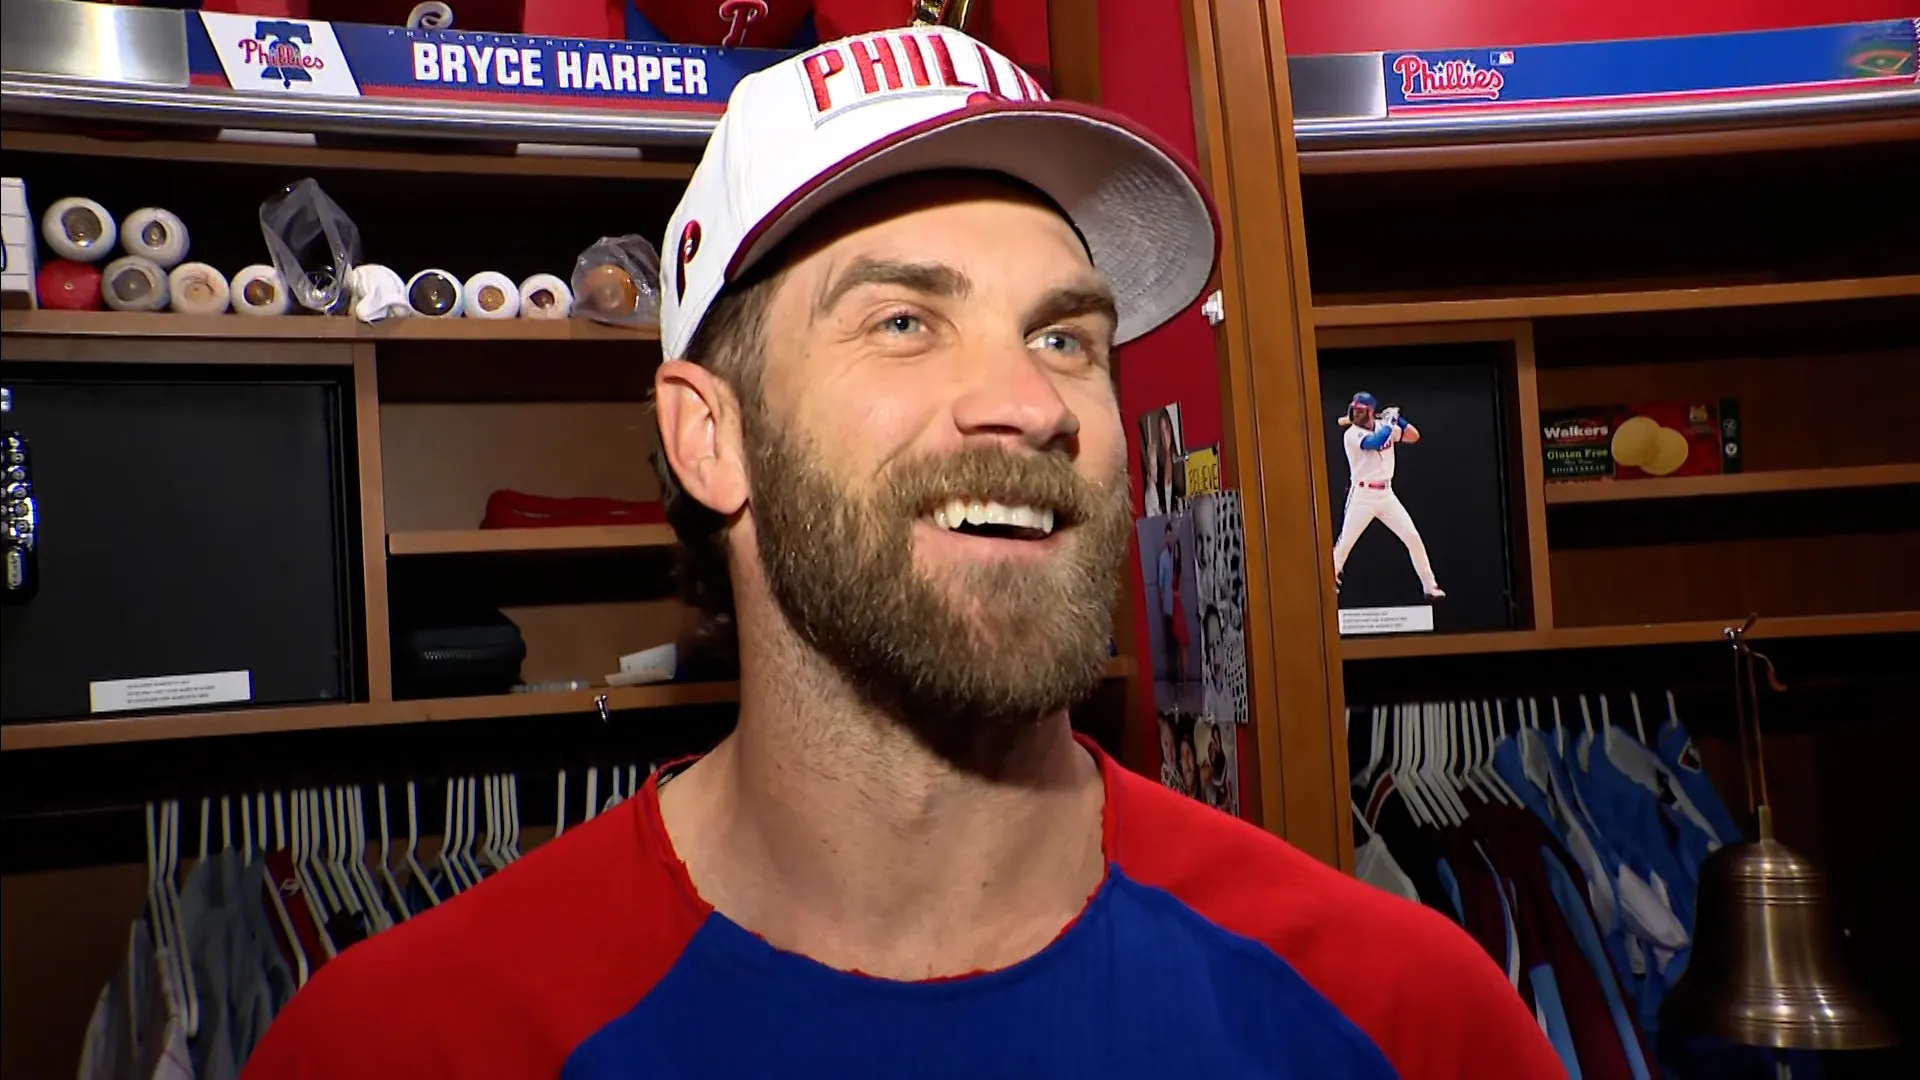 Bryce Harper Harper excited for a warm welcome in first home game